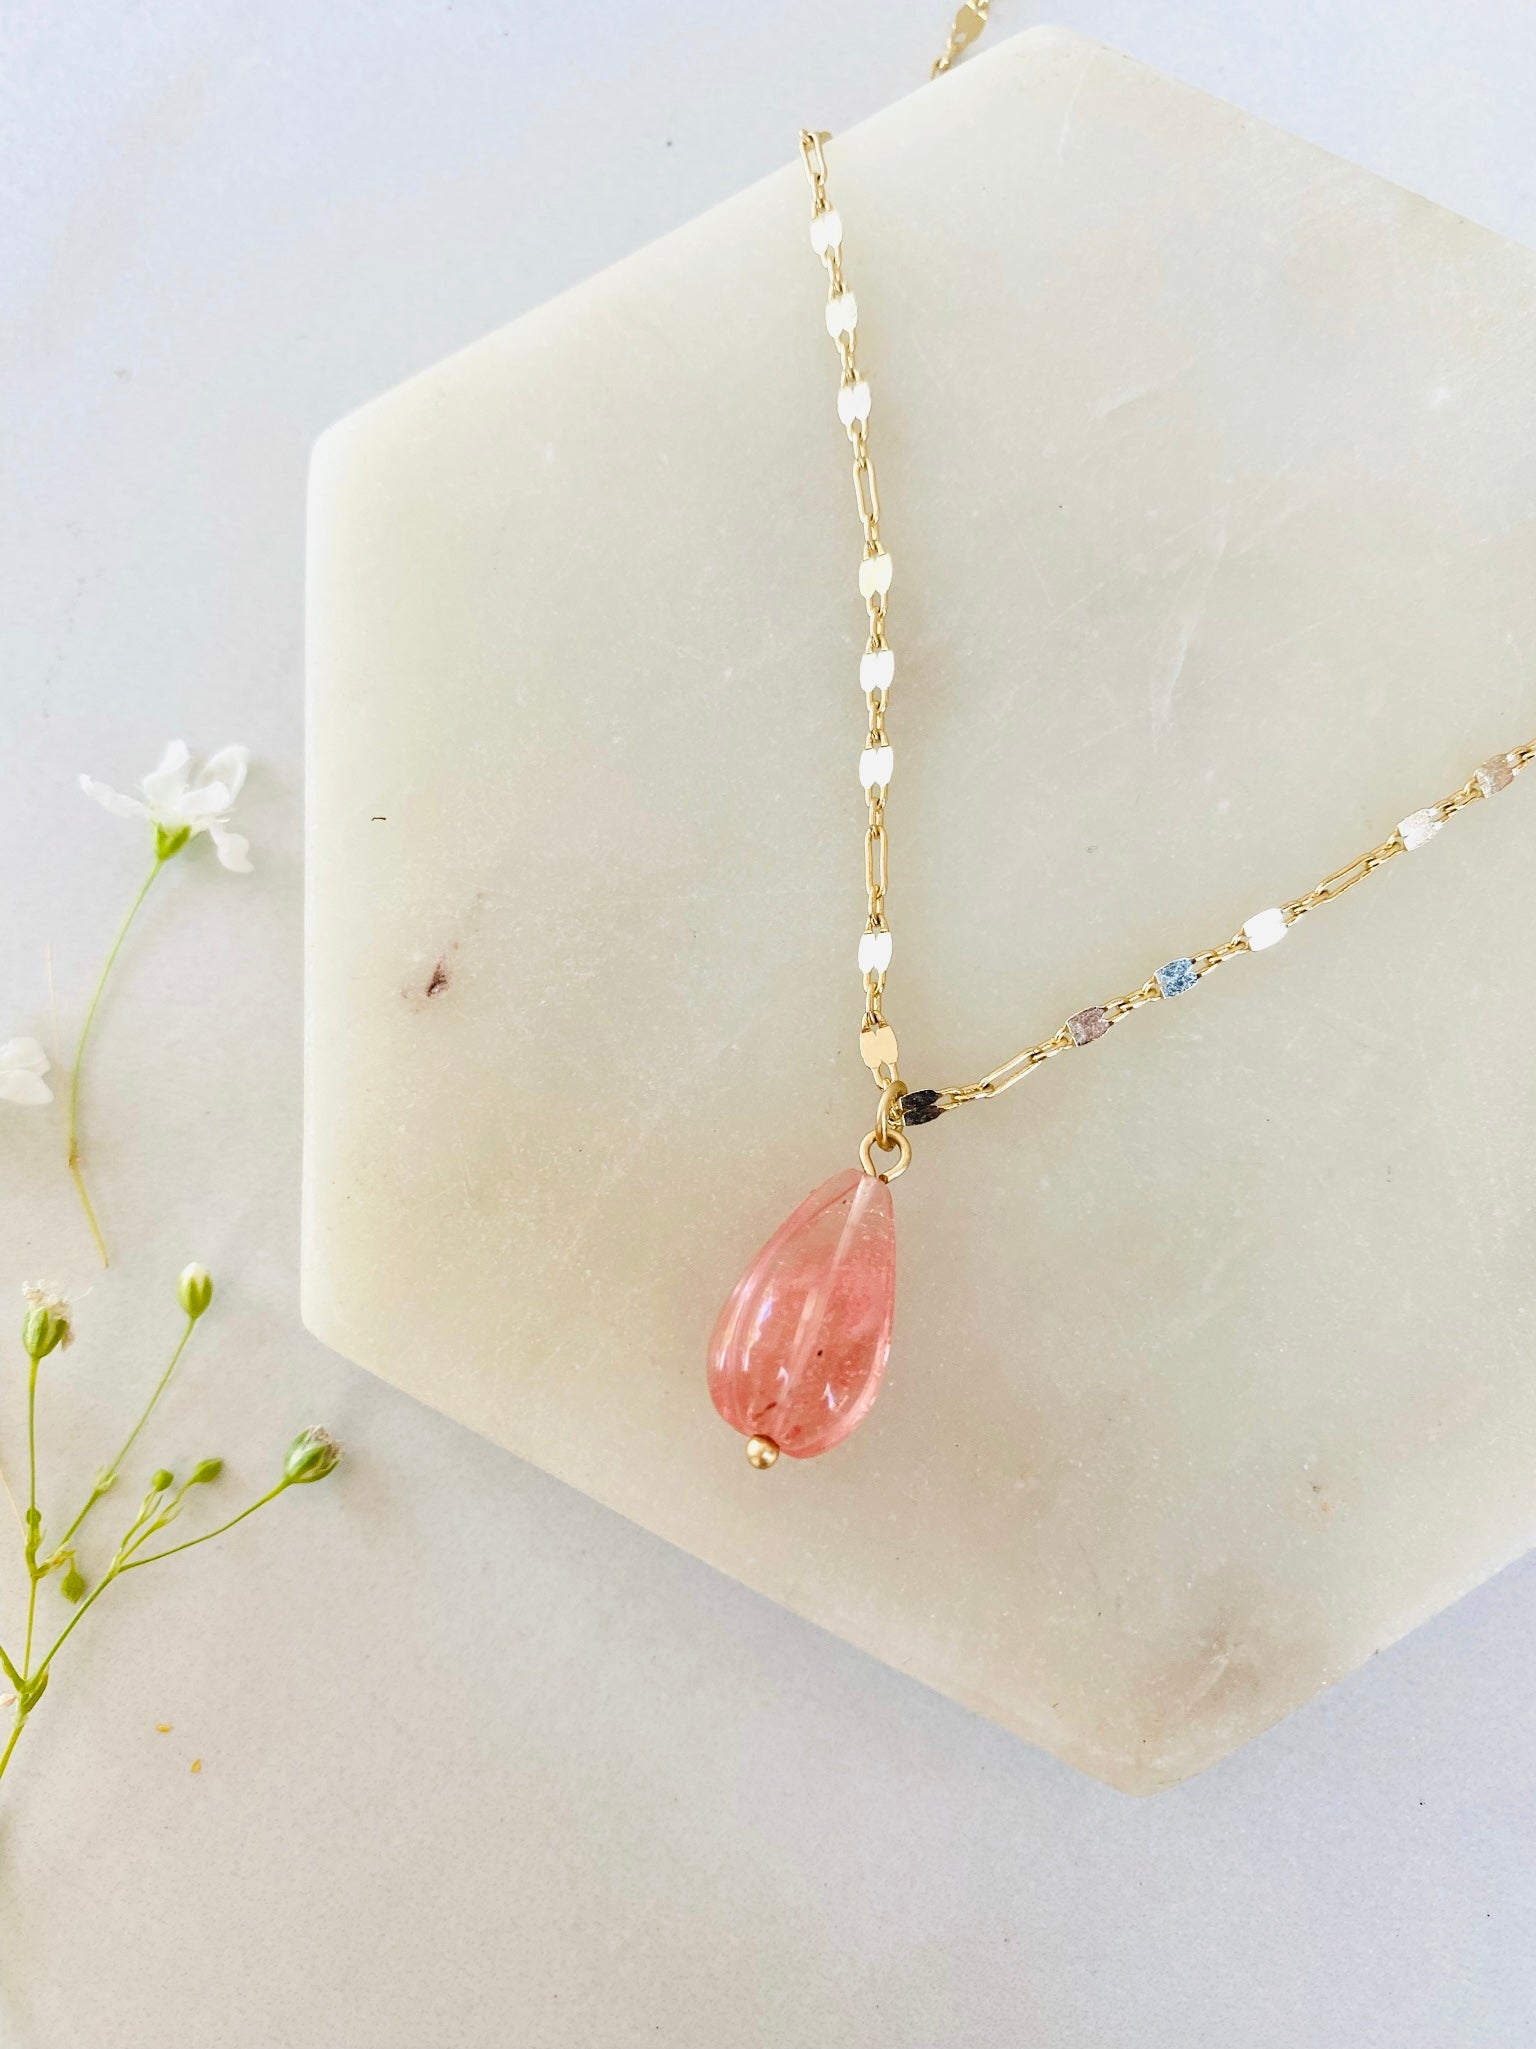 DIY bohemian and popular delicate layering necklace sets in gold, popular 2021 jewelry trends rosy pink floral quartz gemstone teardrop necklace